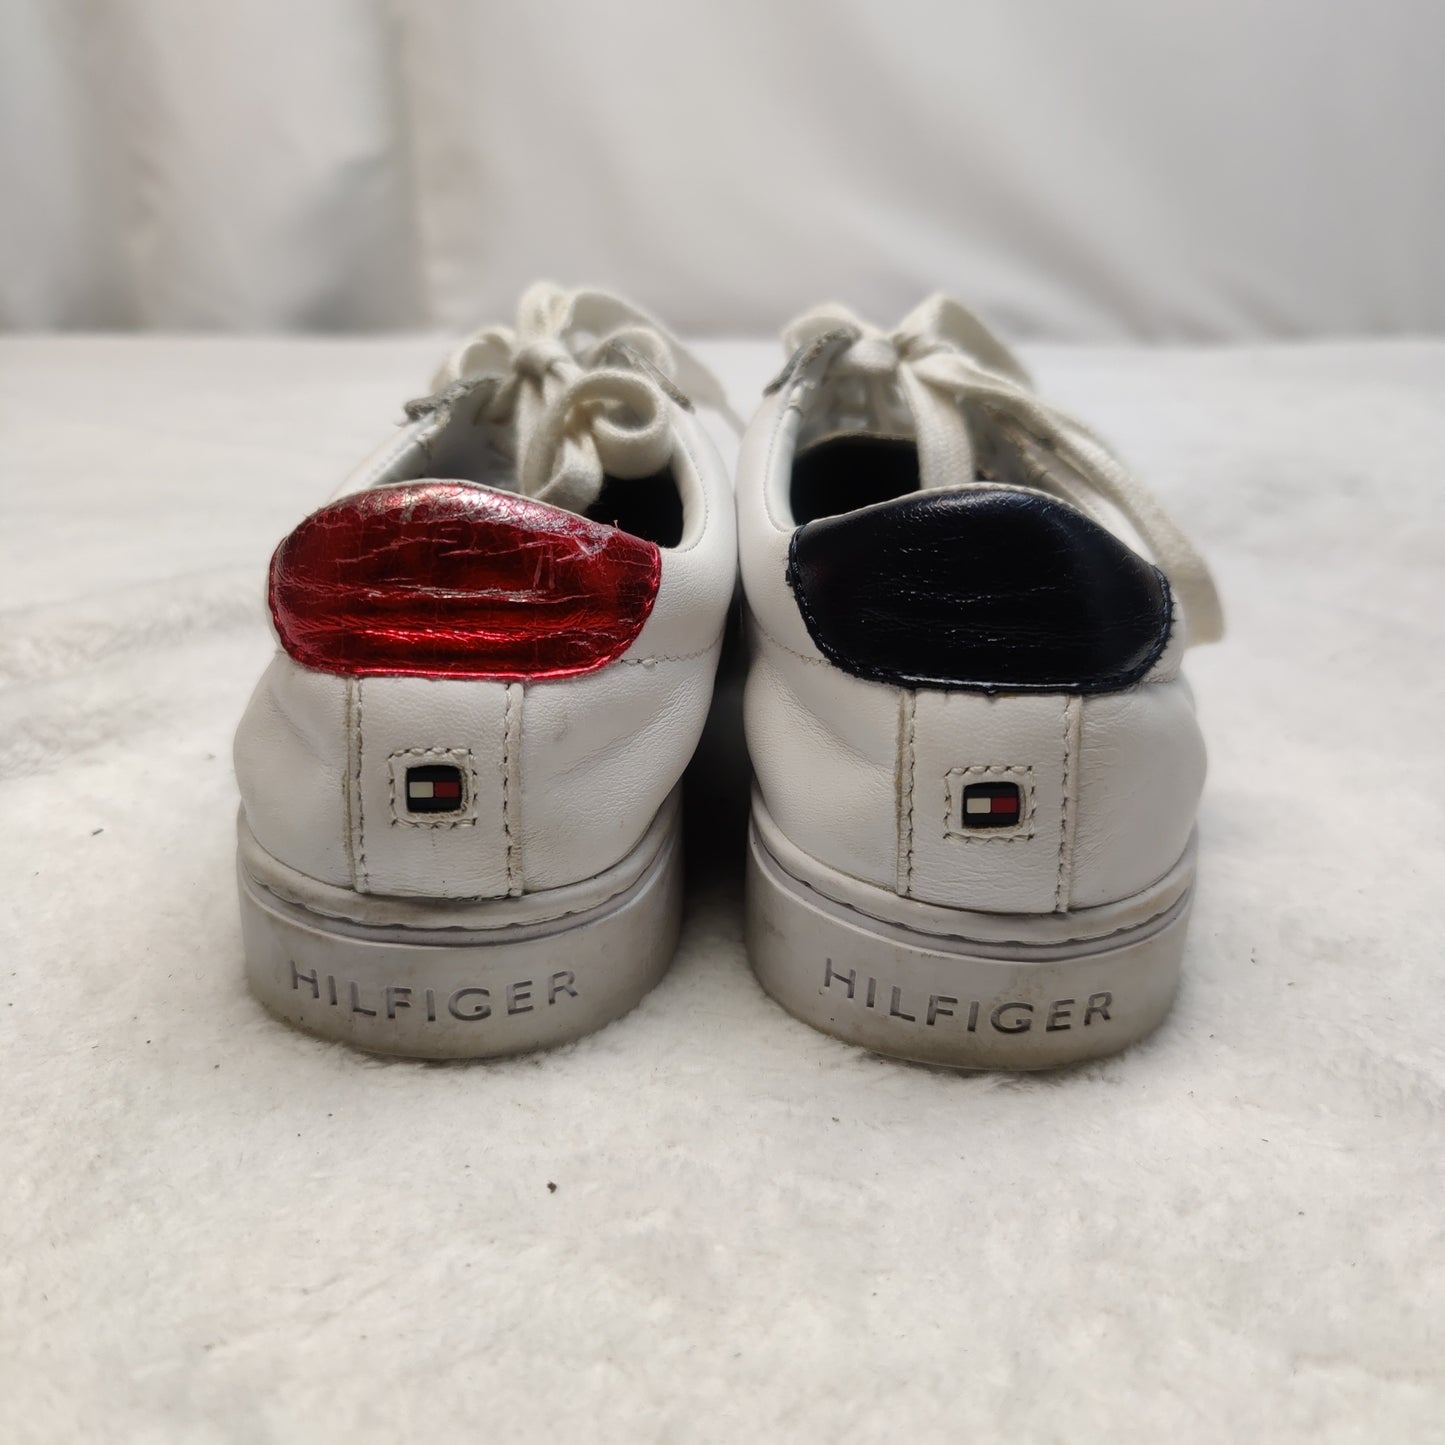 Tommy Hilfiger White Leather Sneaker Trainers Shoes Women UK 4 EU 37